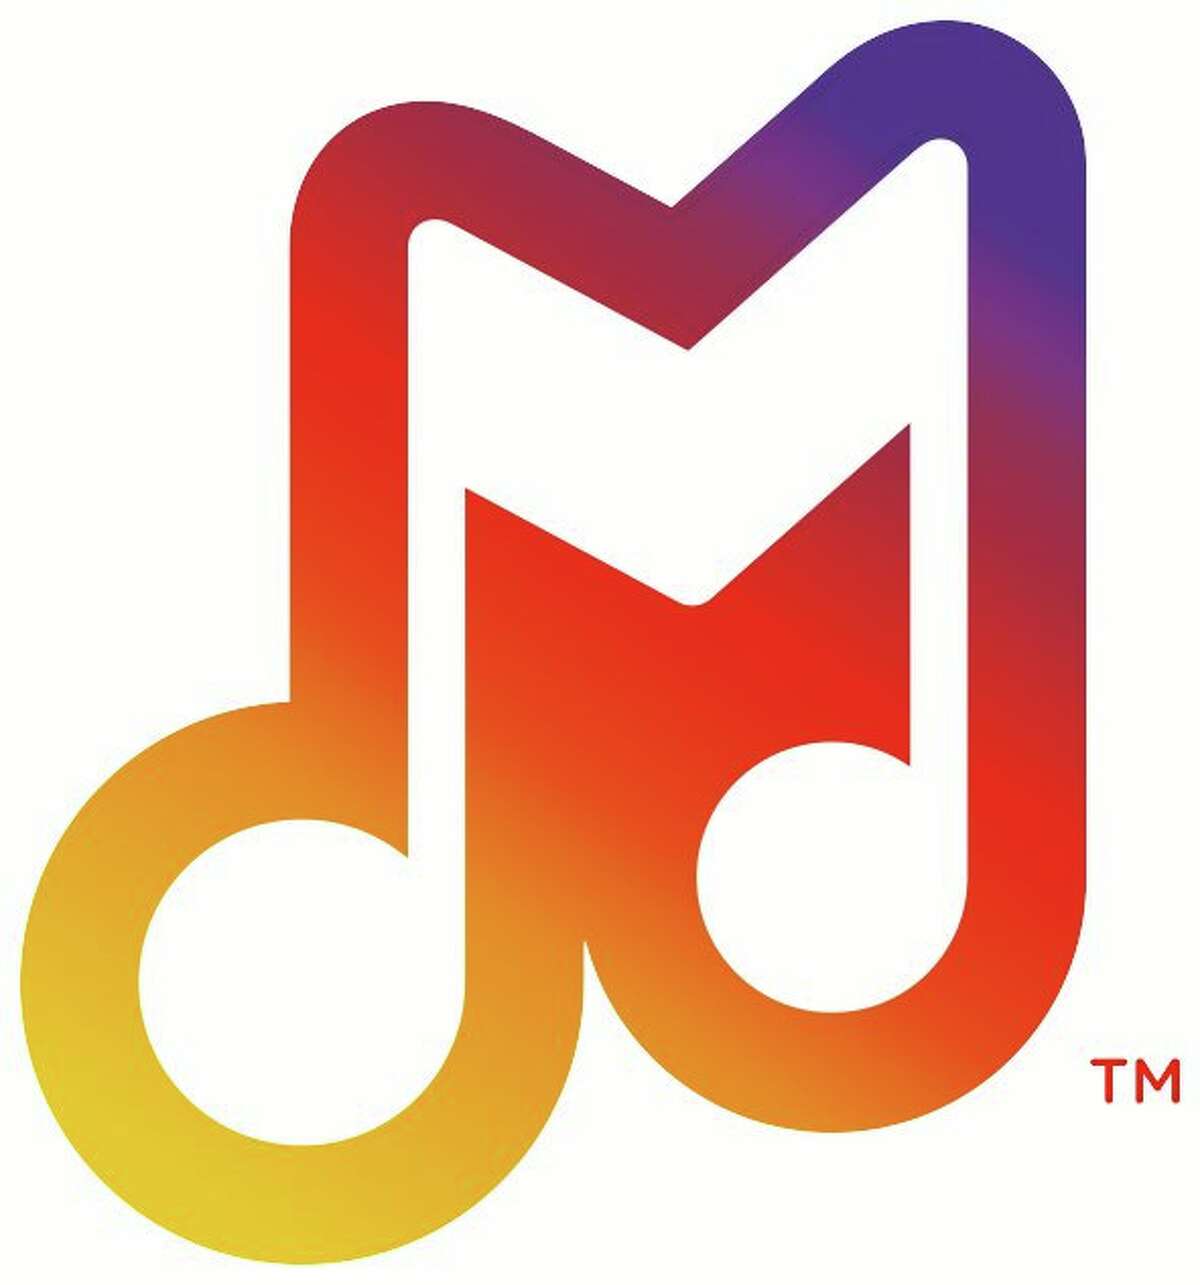 This undated image provided by Samsung shows the logo for the new free music service for its phones that the company unveiled Friday.